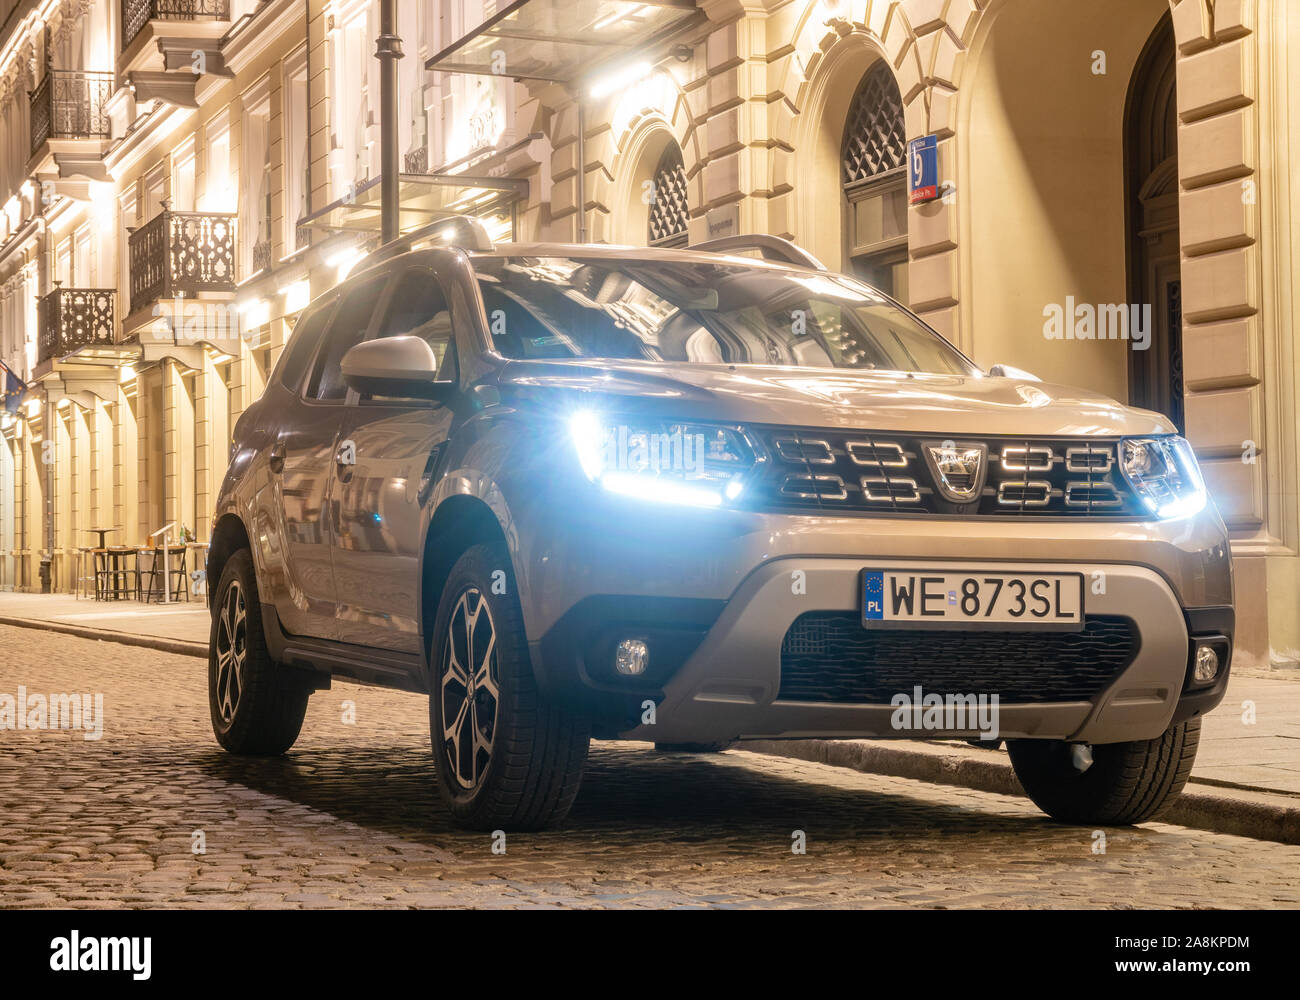 Dacia International High Resolution Stock Photography and Images - Alamy